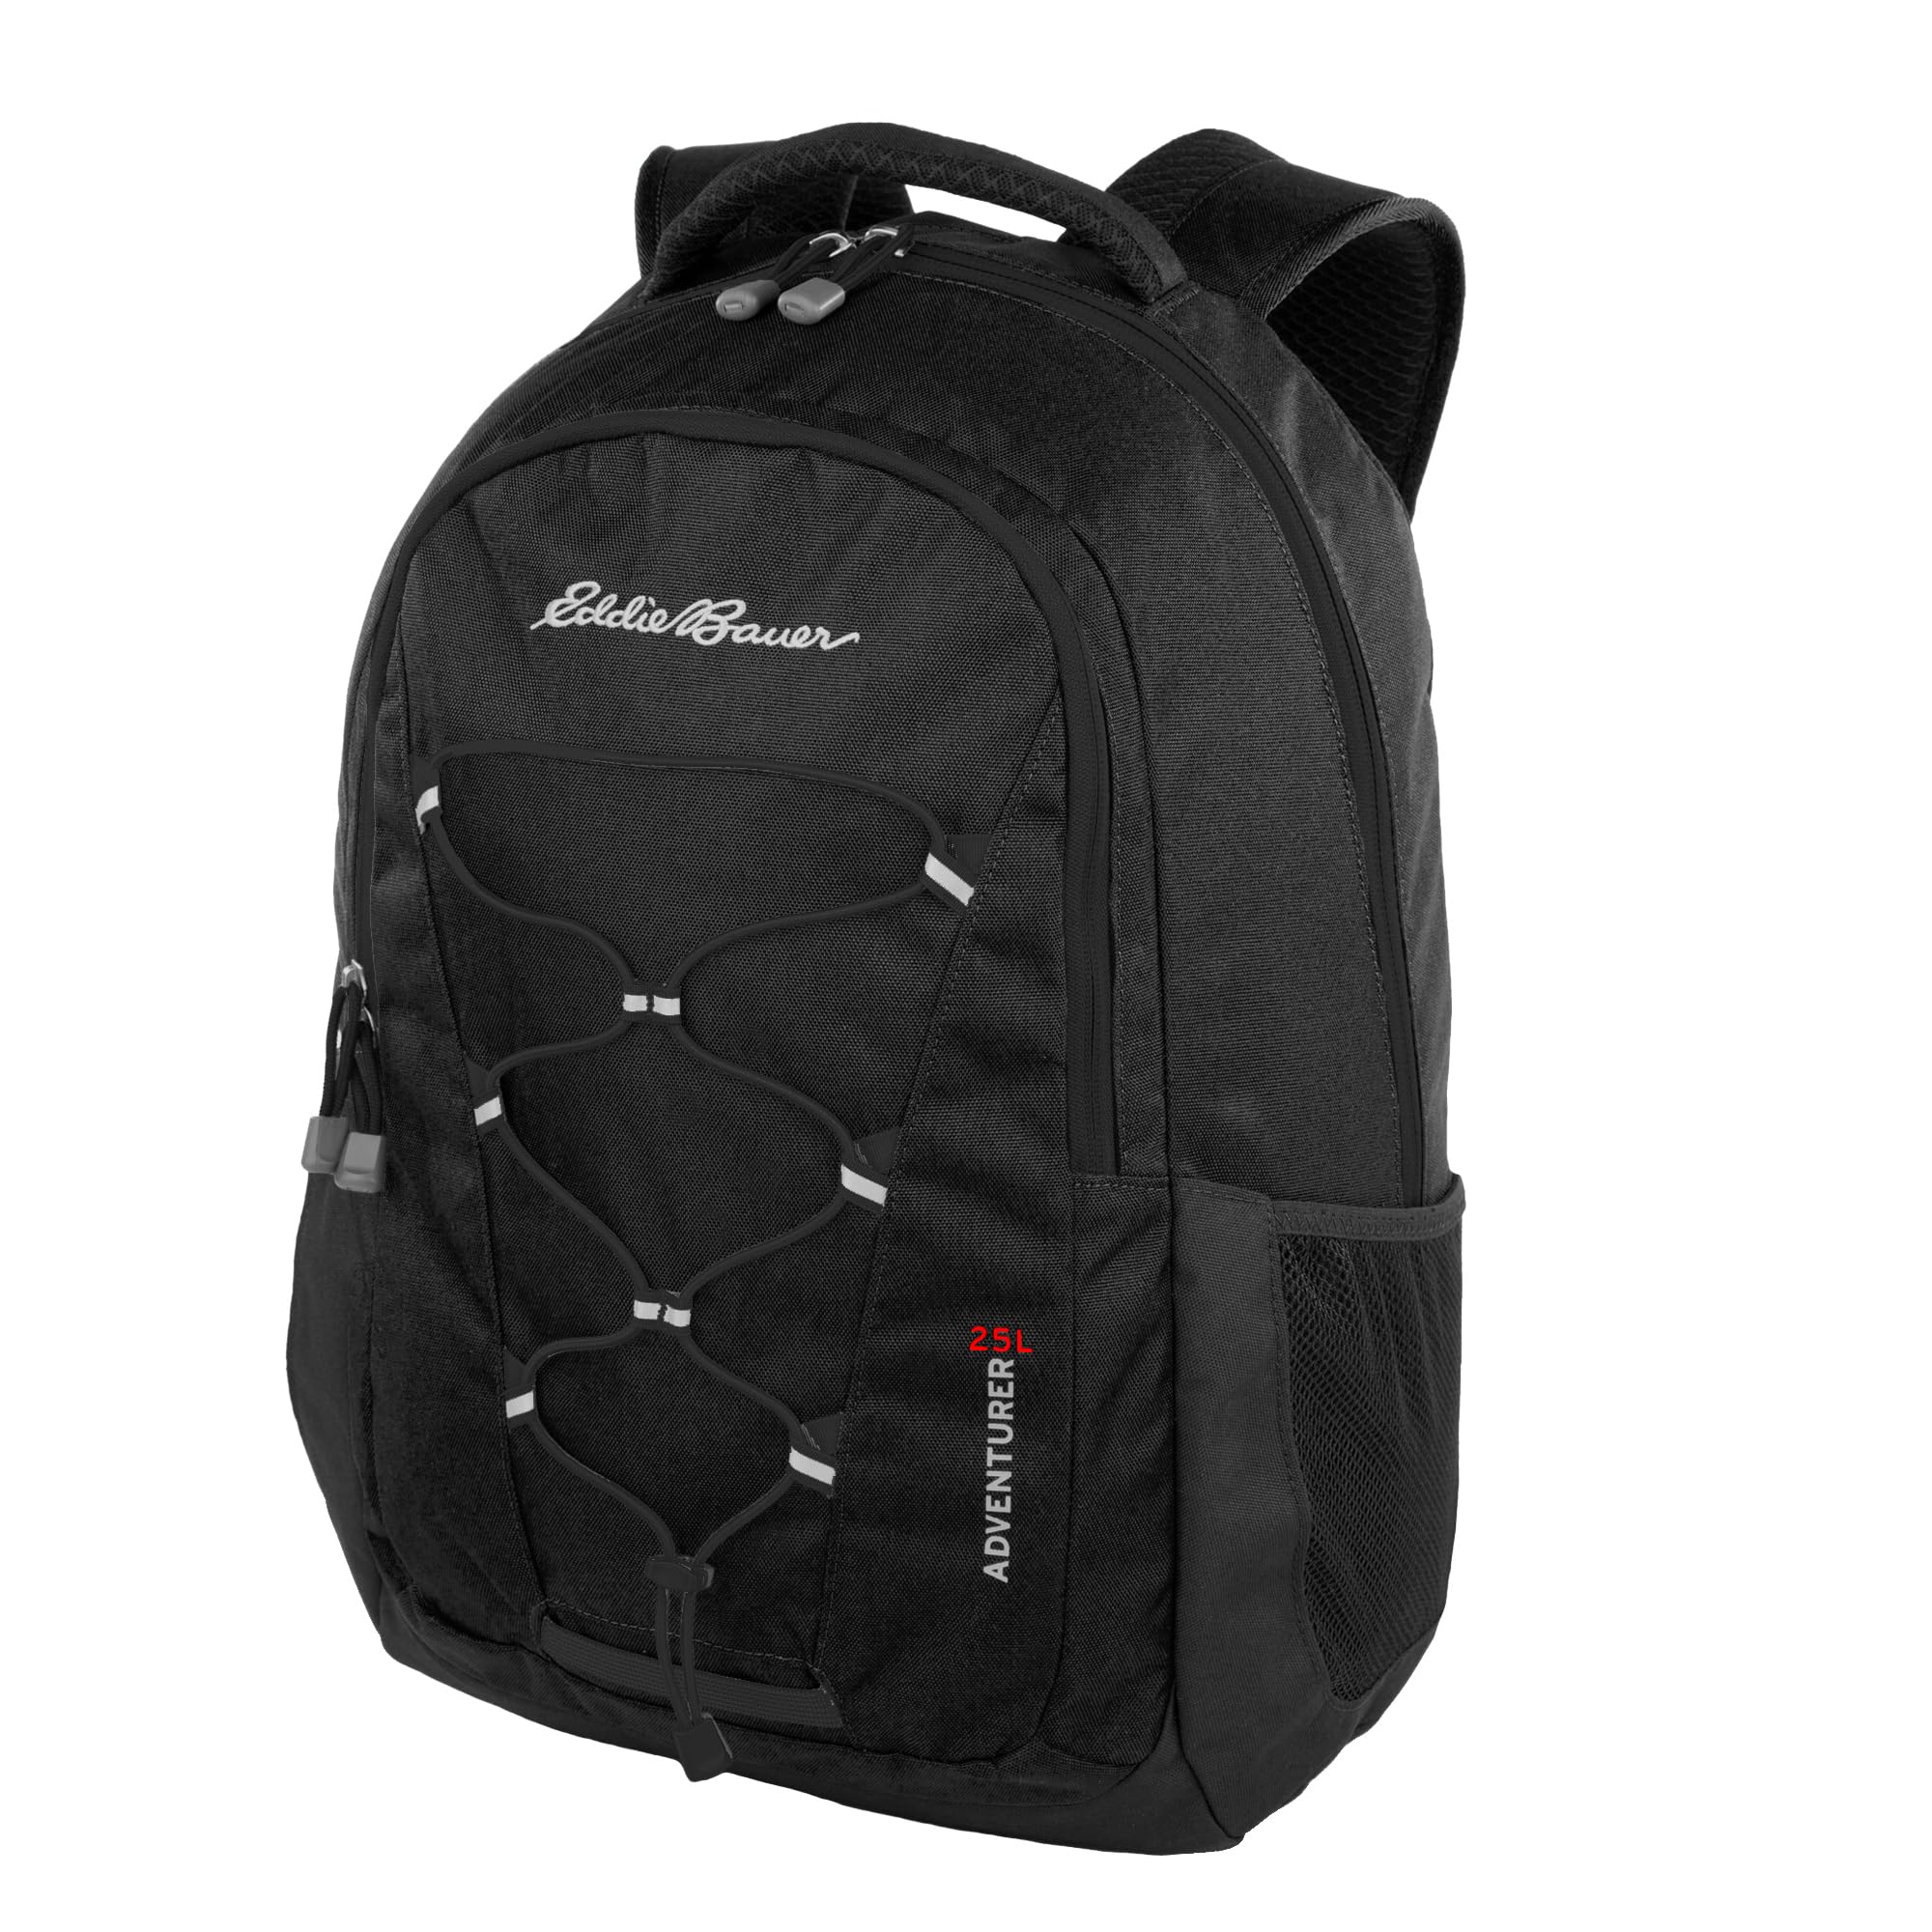 Eddie Bauer Backpack with Organization Compartments and Hydration/Laptop Compatible Sleeve (Multiple Sizes Available), Adventurer-Black, 25L